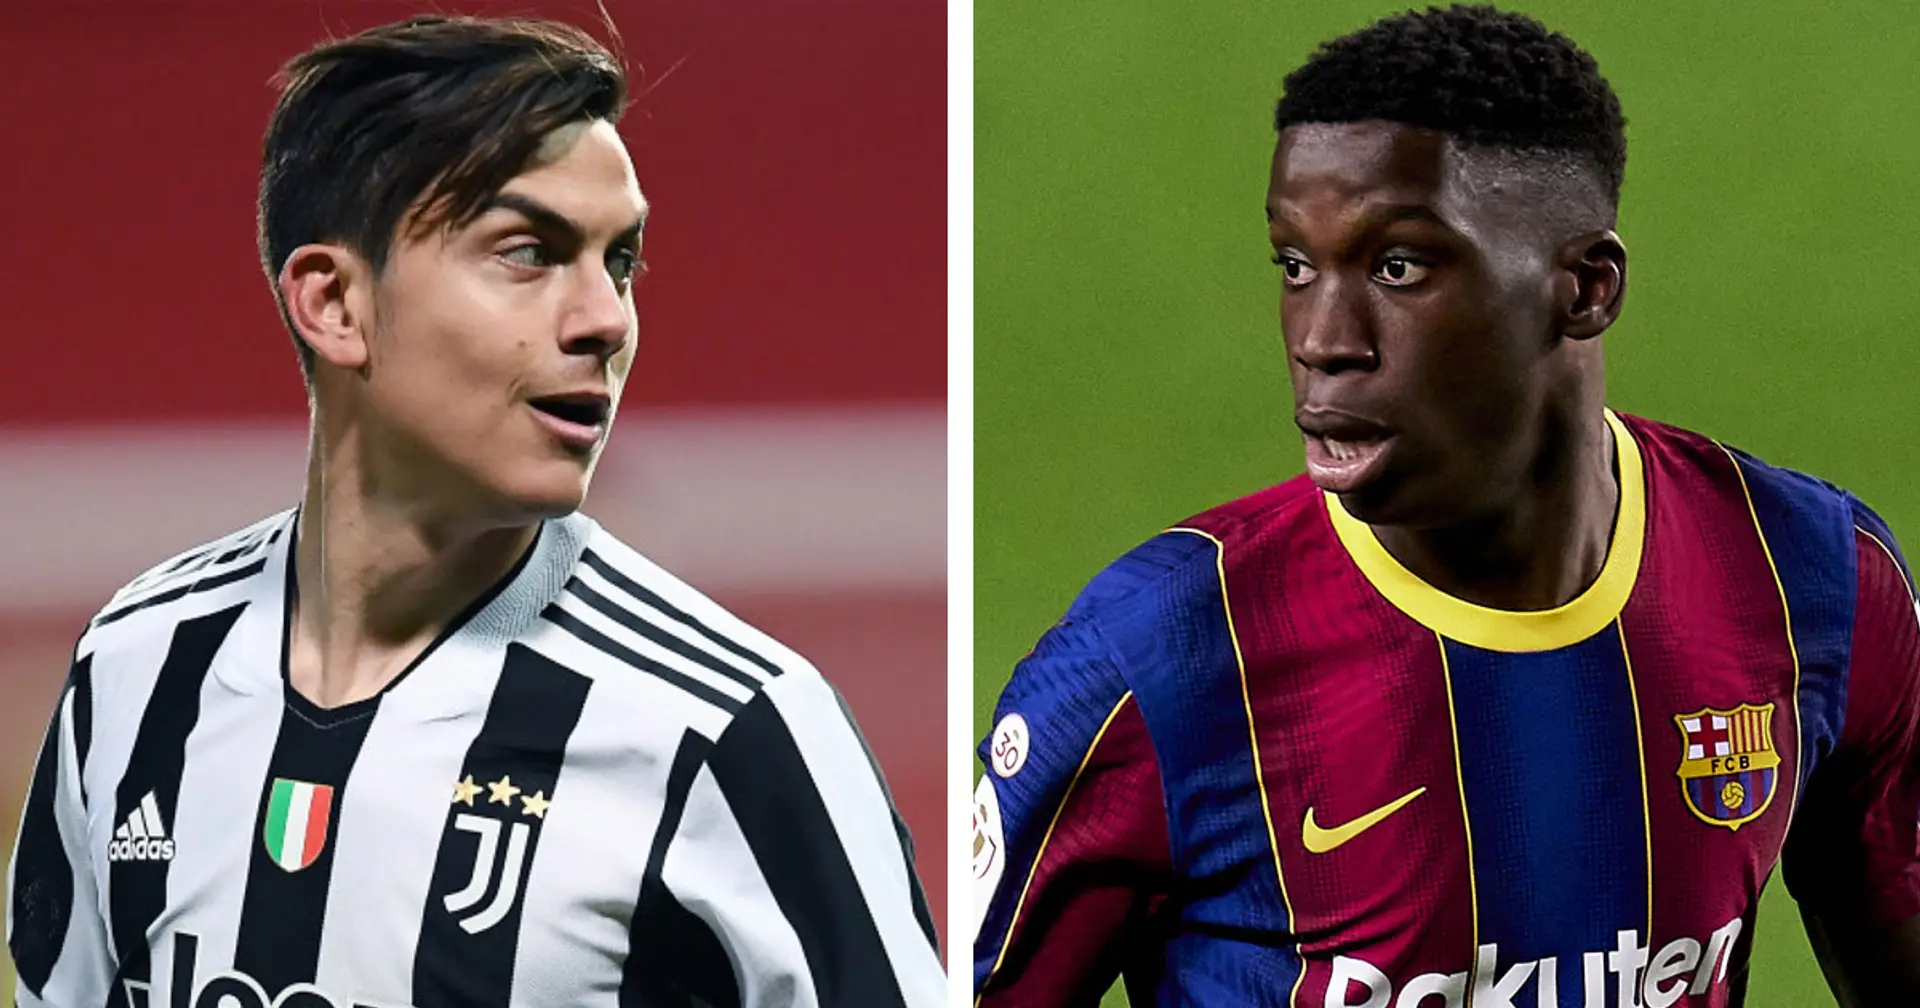 Dybala, Moriba & more: 15 names in Barca's transfer round-up with probability ratings